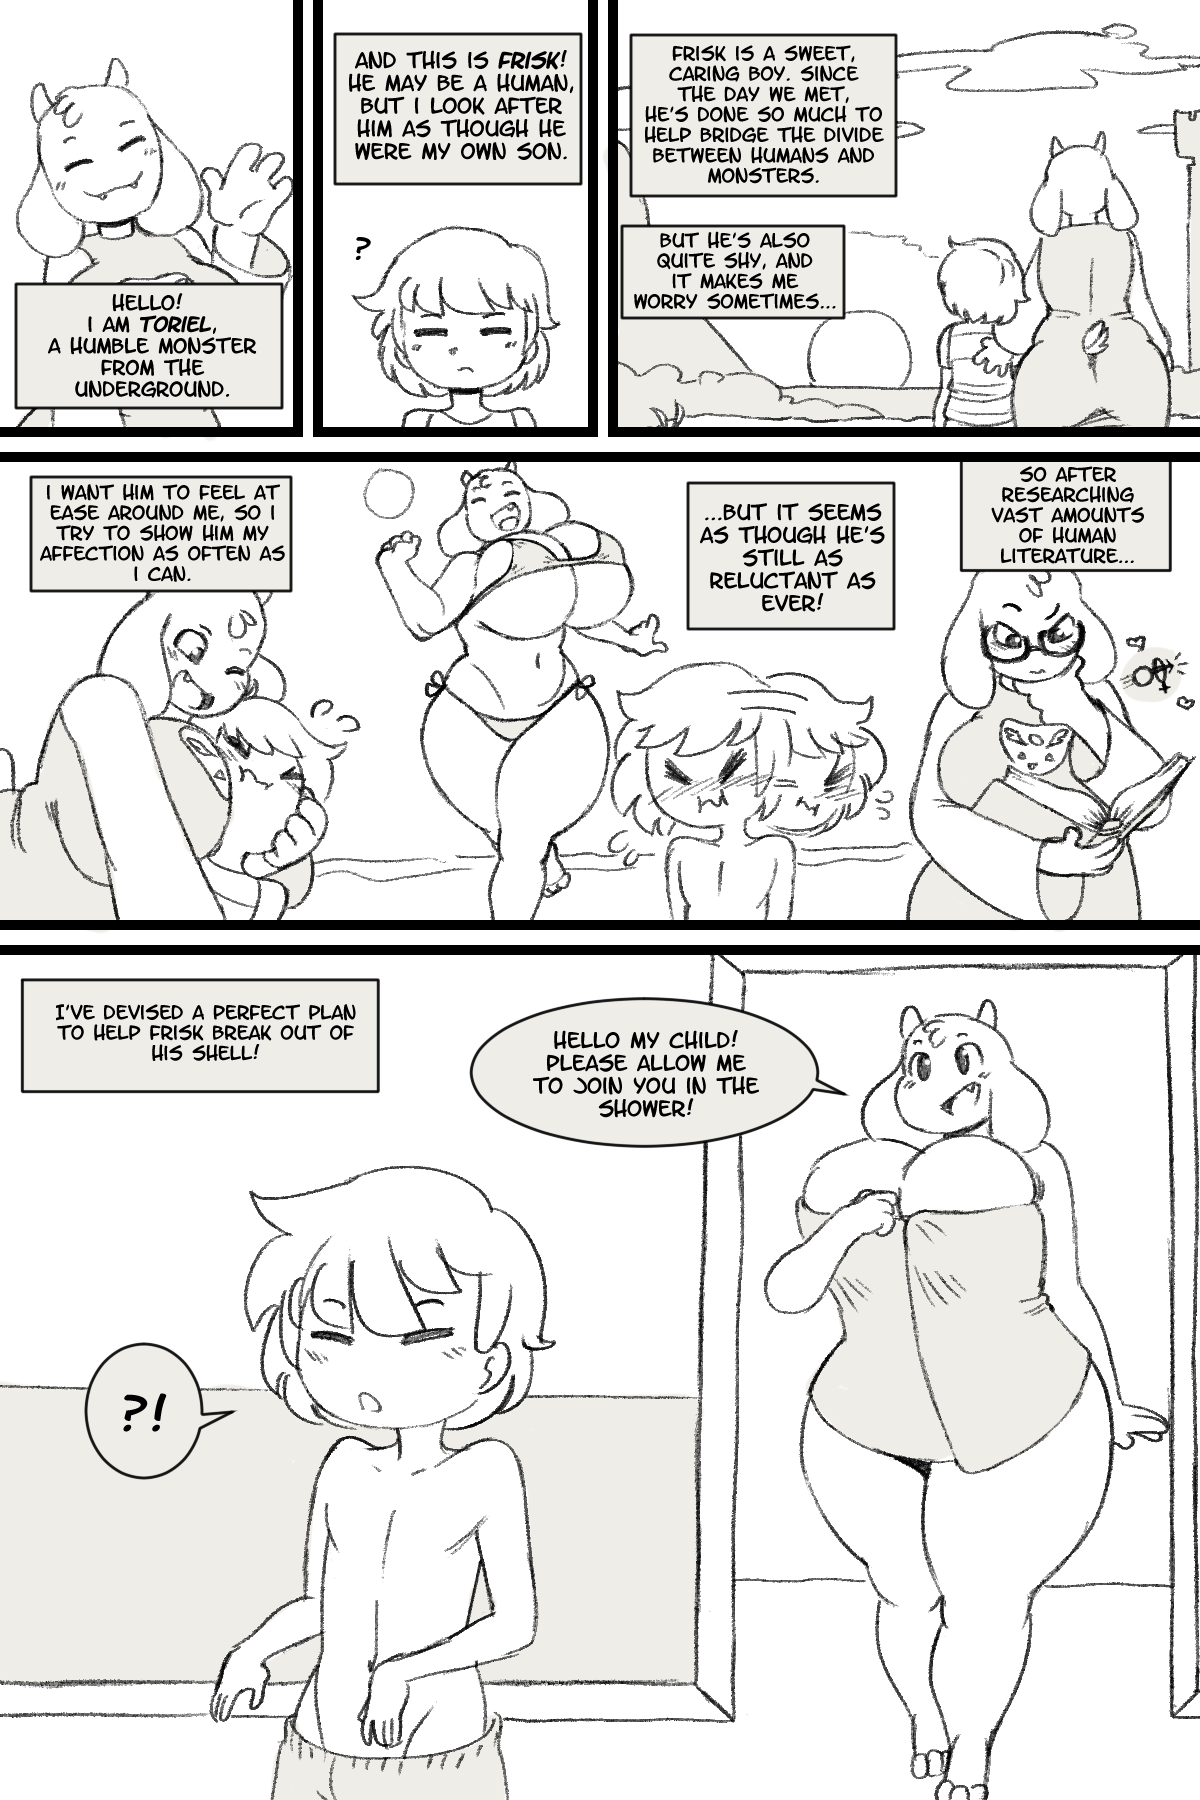 Undertale Patreon Comic - Page 1 - HentaiEra